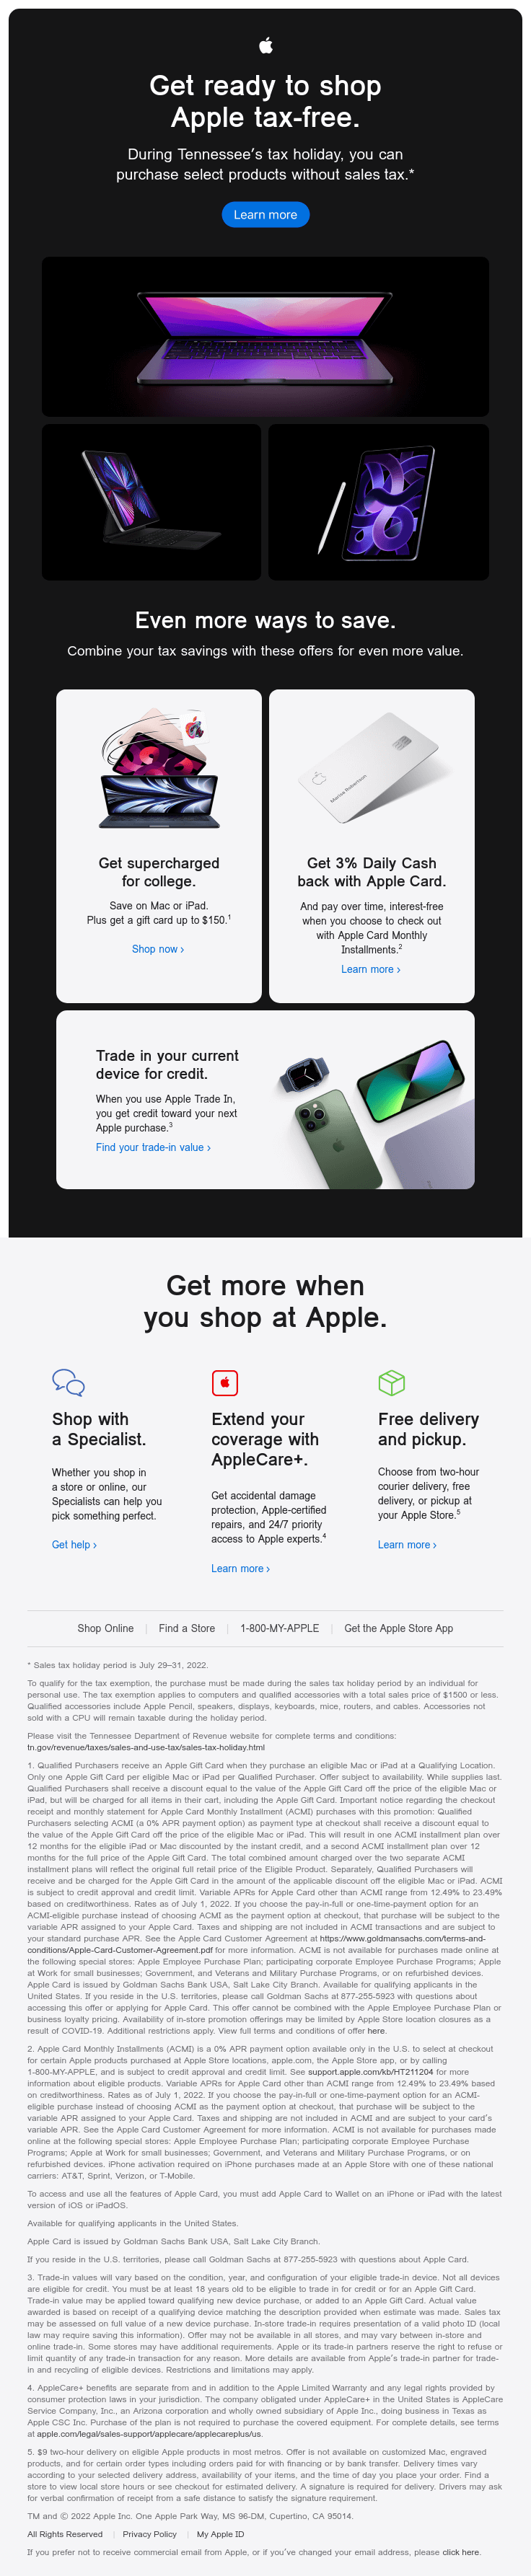 It’s almost time to shop tax-free. - Apple Email Newsletter